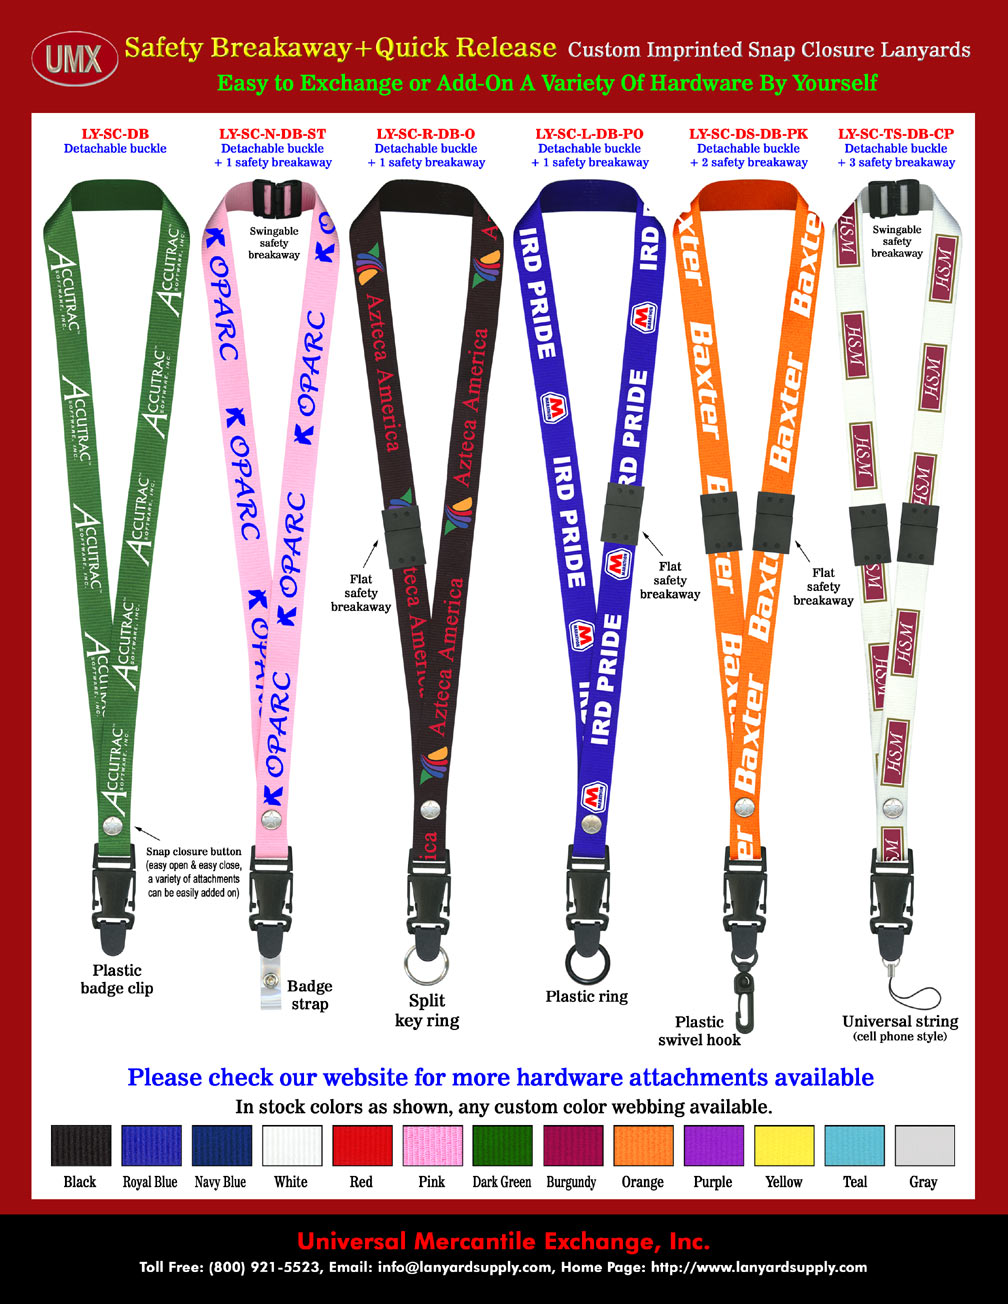 The 3/4" wide by 36" long custom printed safety breakaway ID lanyards with detachable buckles.